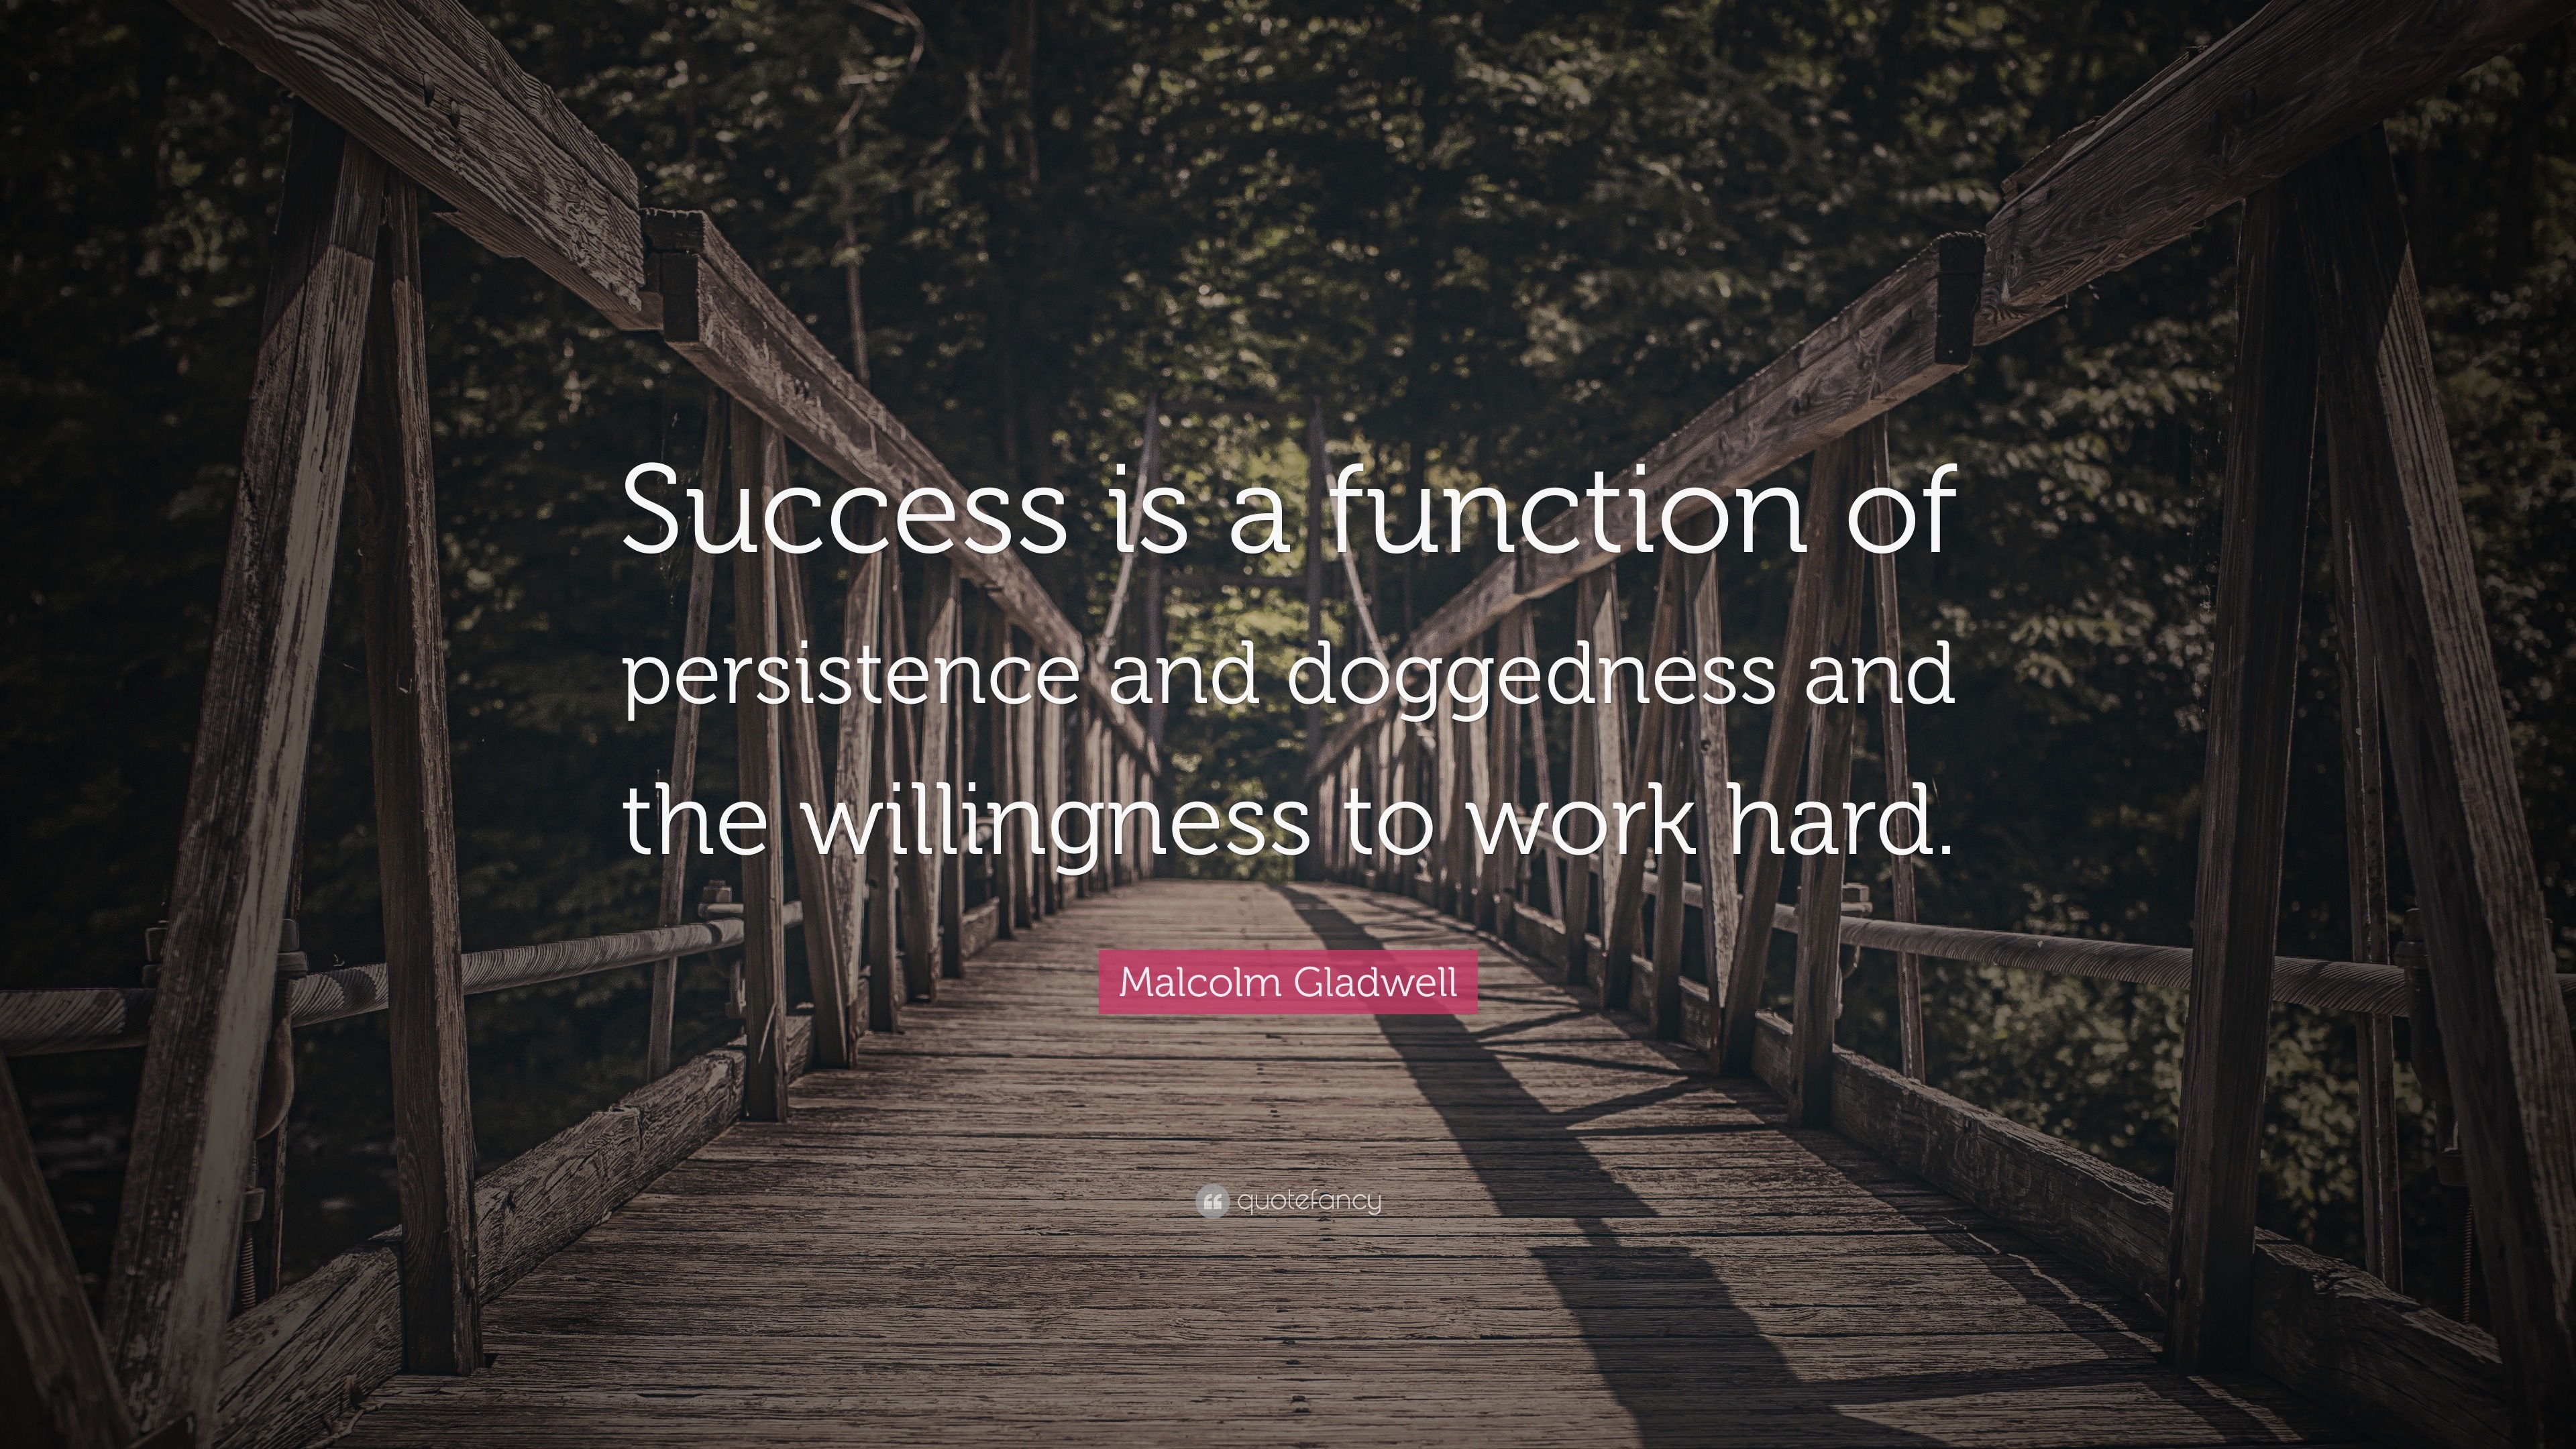 Malcolm Gladwell Quote “Success is a function of